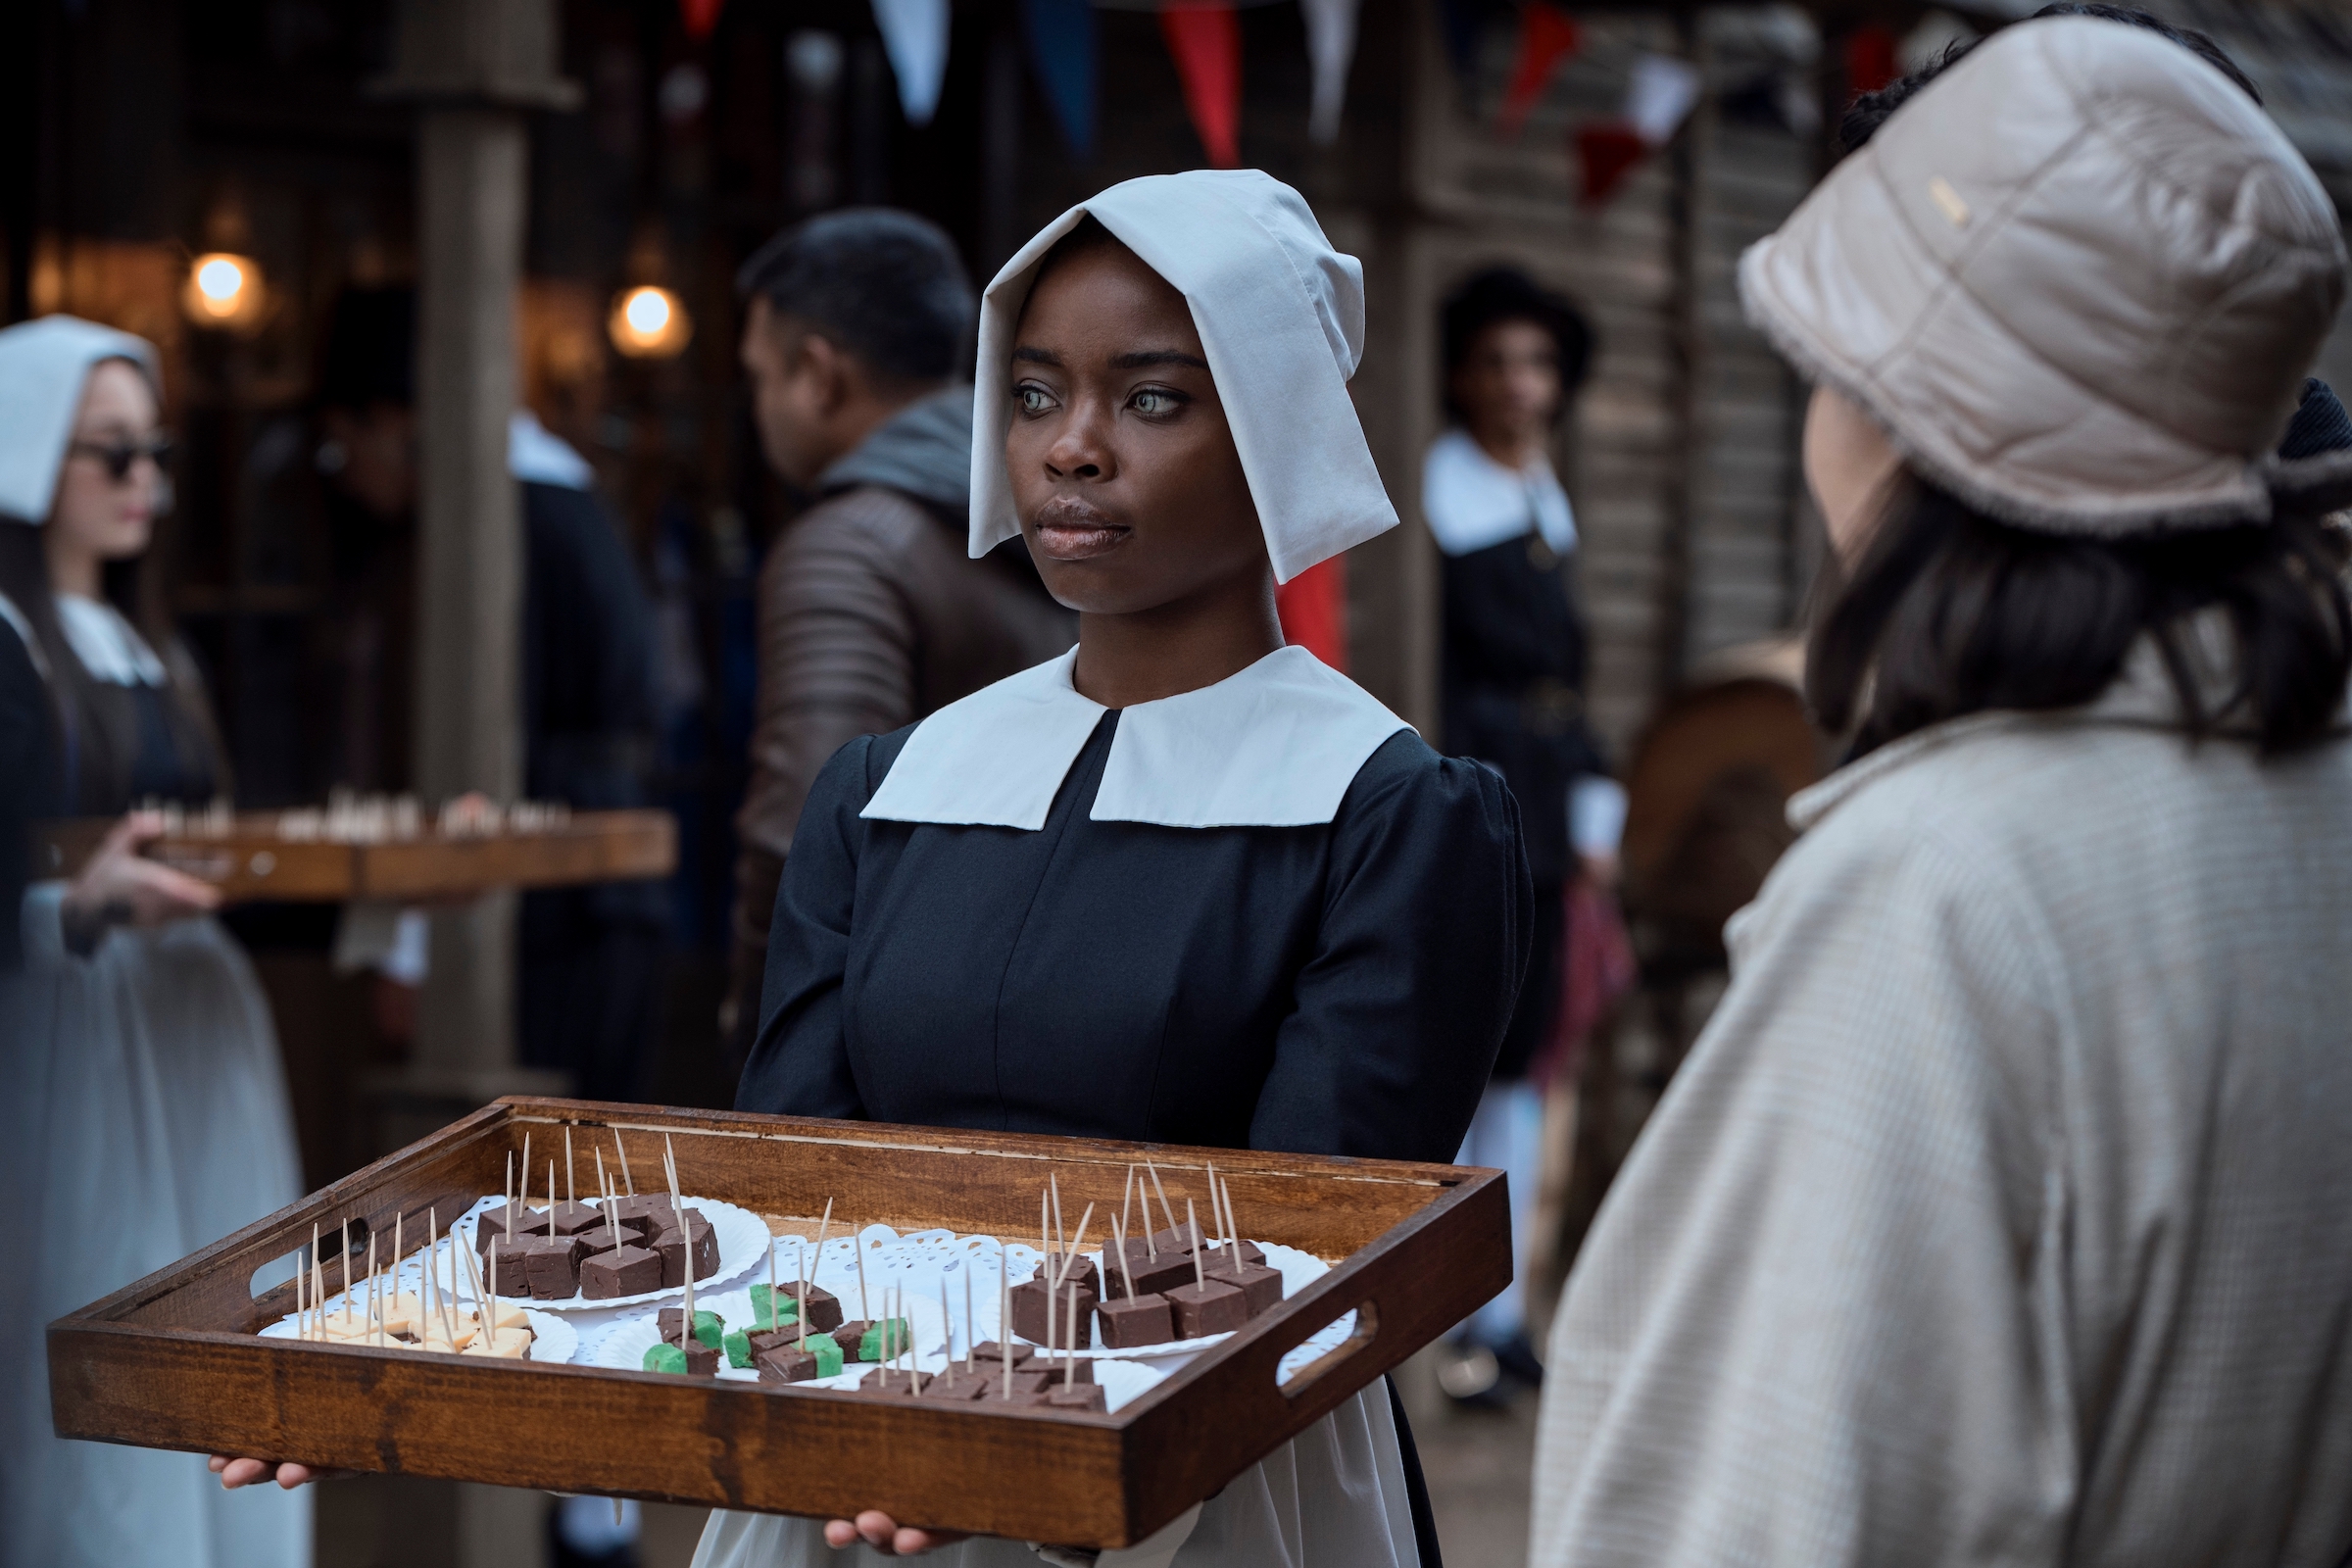 Bianca Barclay (Joy Sunday), a siren student at Nevermore, offers free fudge samples at Pilgrim World as part of Outreach Day. (Vlad Cioplea—Netflix)